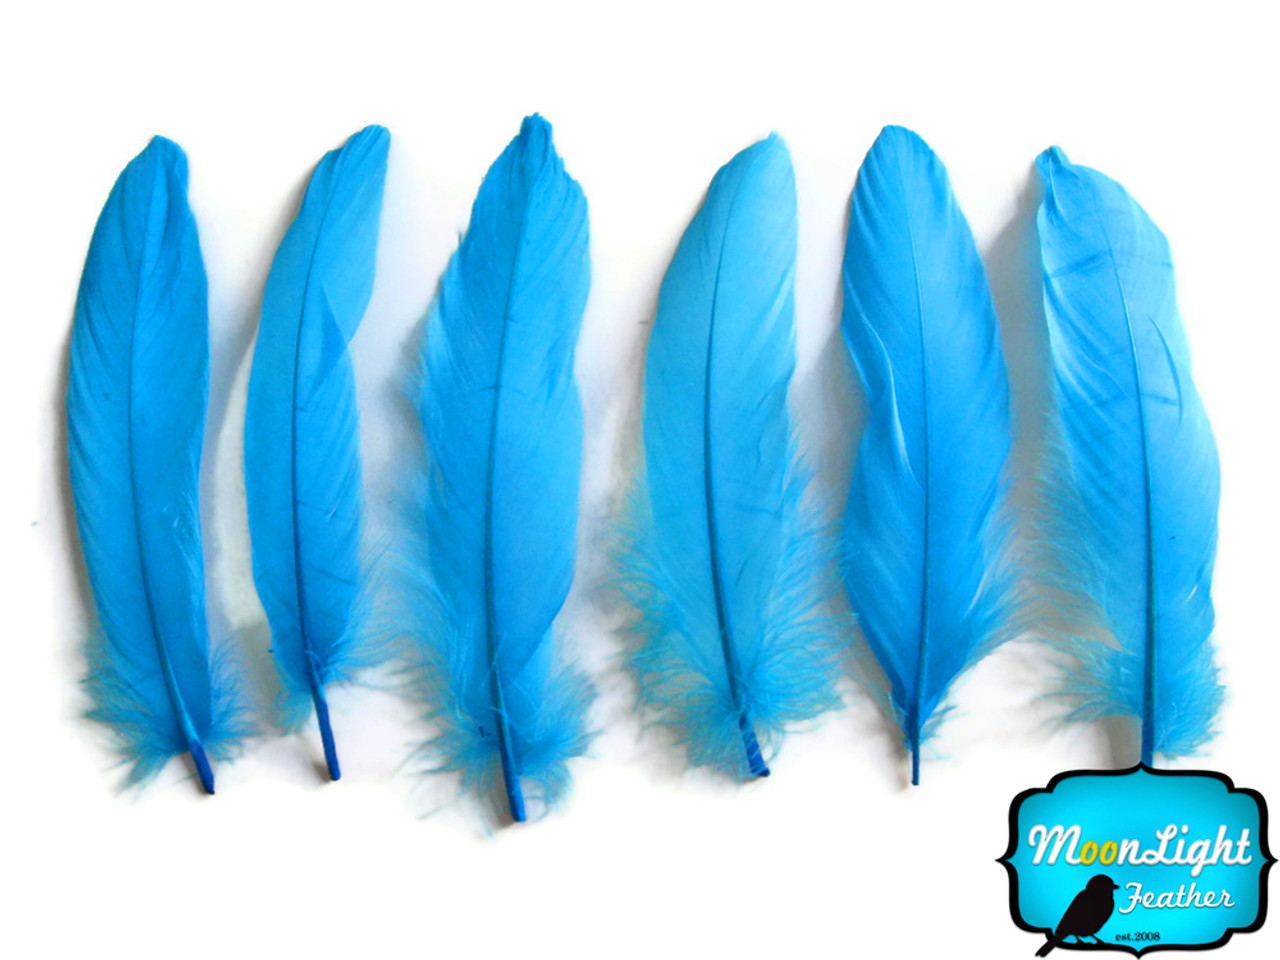 White Goose Feathers, 1 Pack WHITE Goose Satinettes Loose Feathers